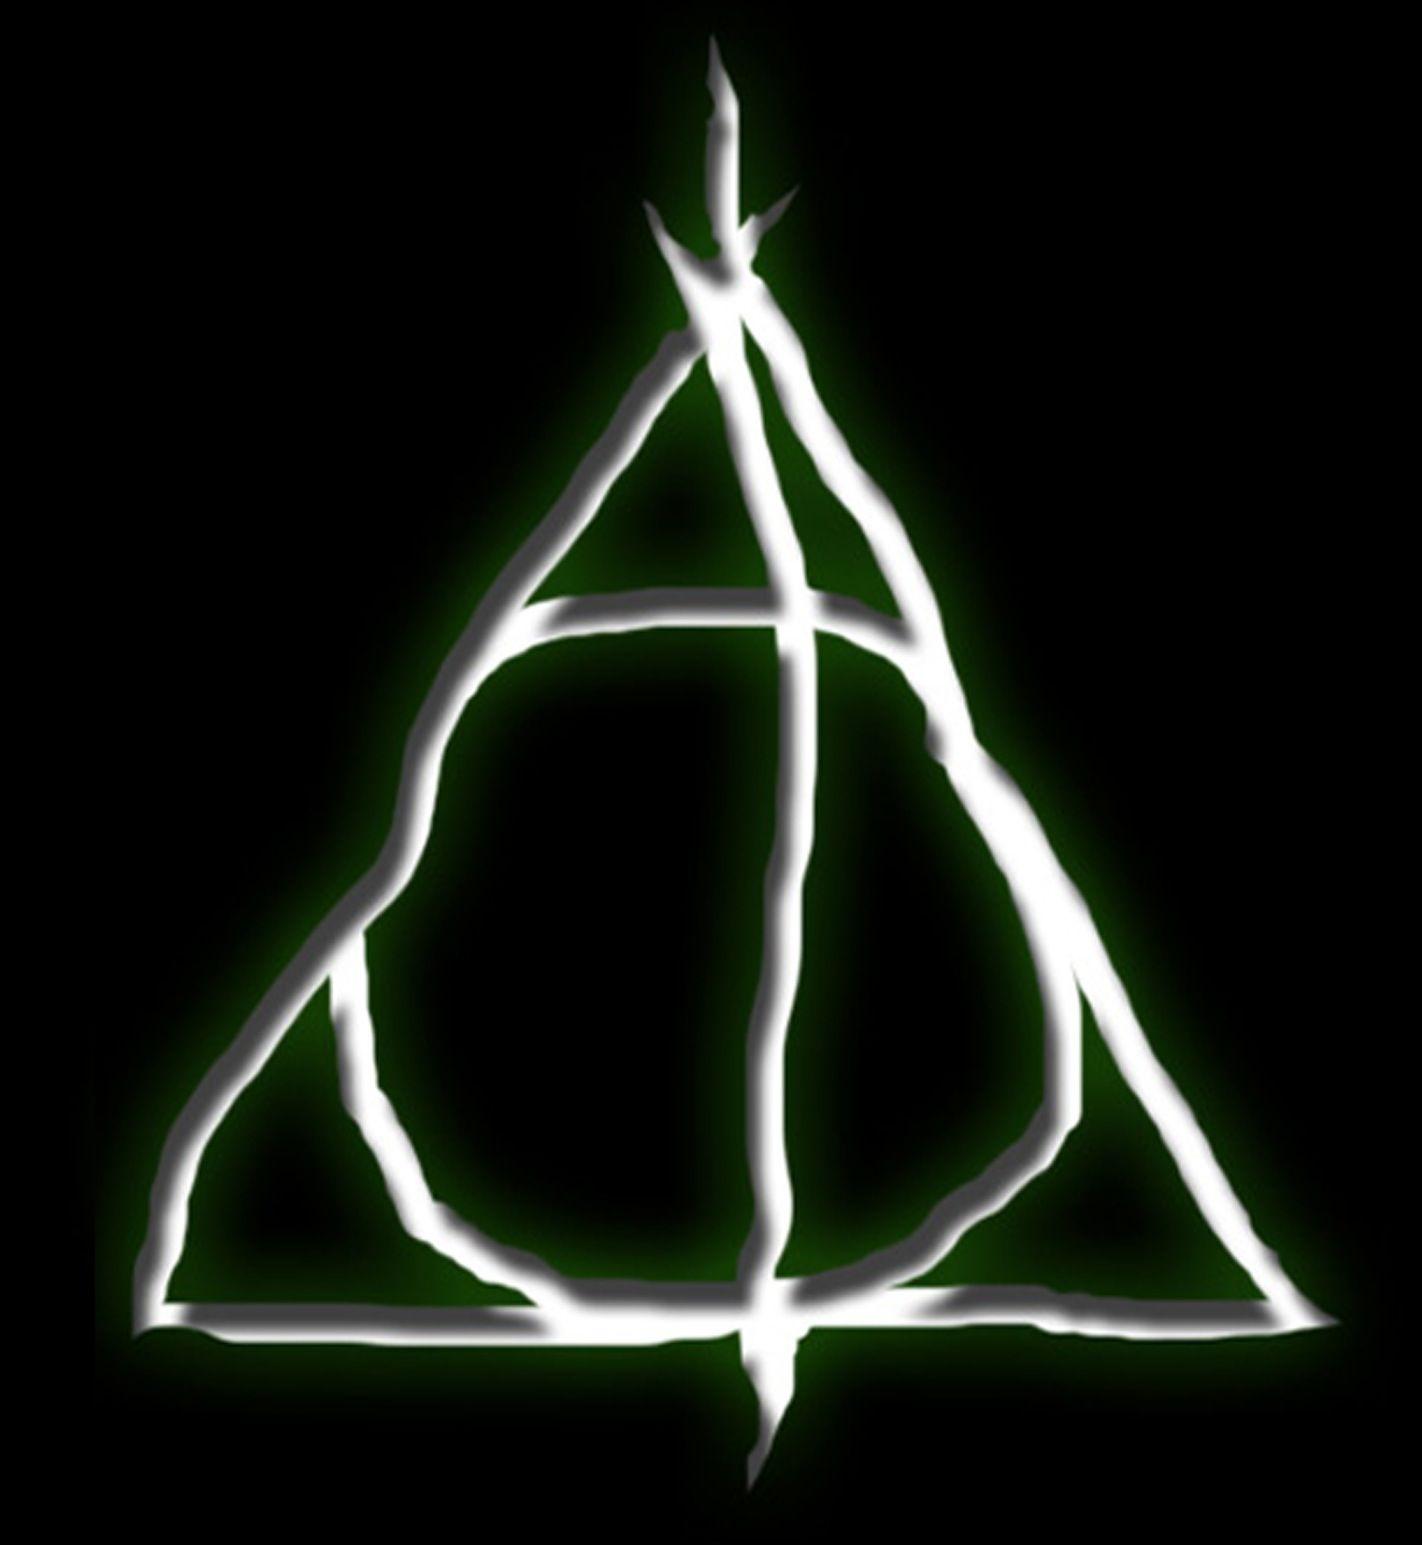 Harry Potter & the Deathly Hallows image deathly hallows symbol HD